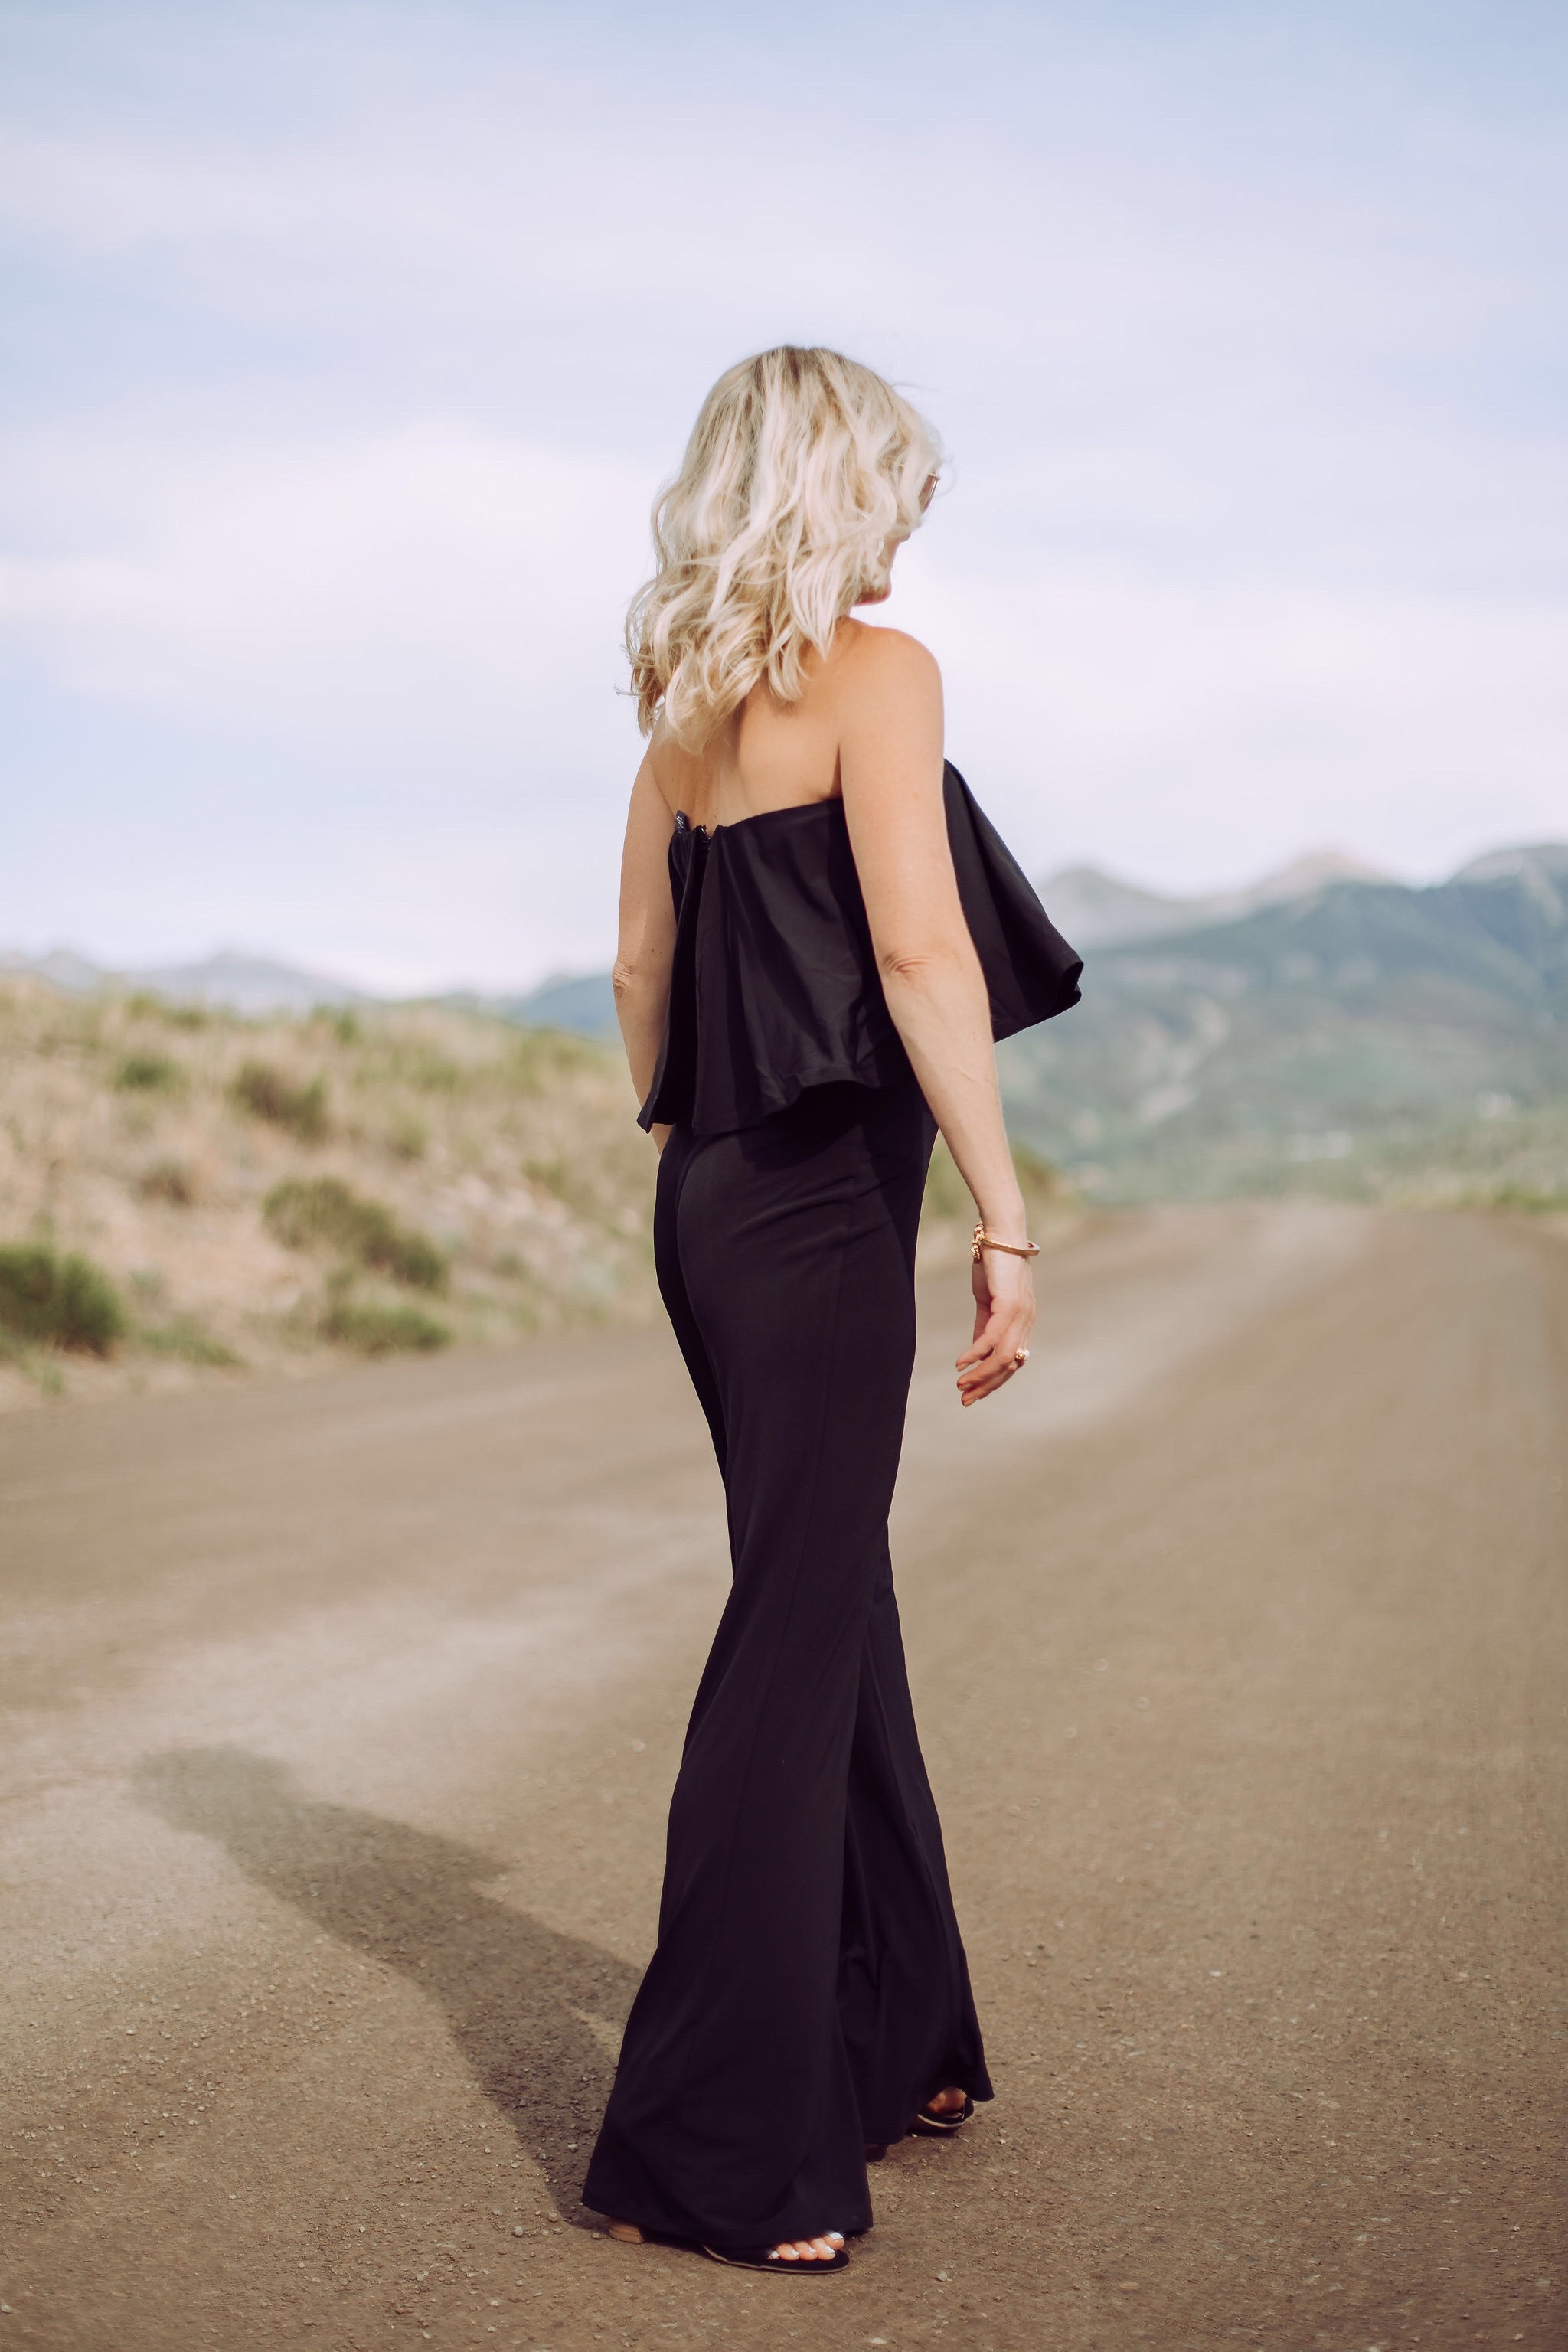 Jumpsuits Over 40, Fashion Blogger Erin Busbee of Busbee Style wearing a black flared jumpsuit by Scoop and black strappy block heel sandals by Scoop from Walmart walking in Telluride, Colorado